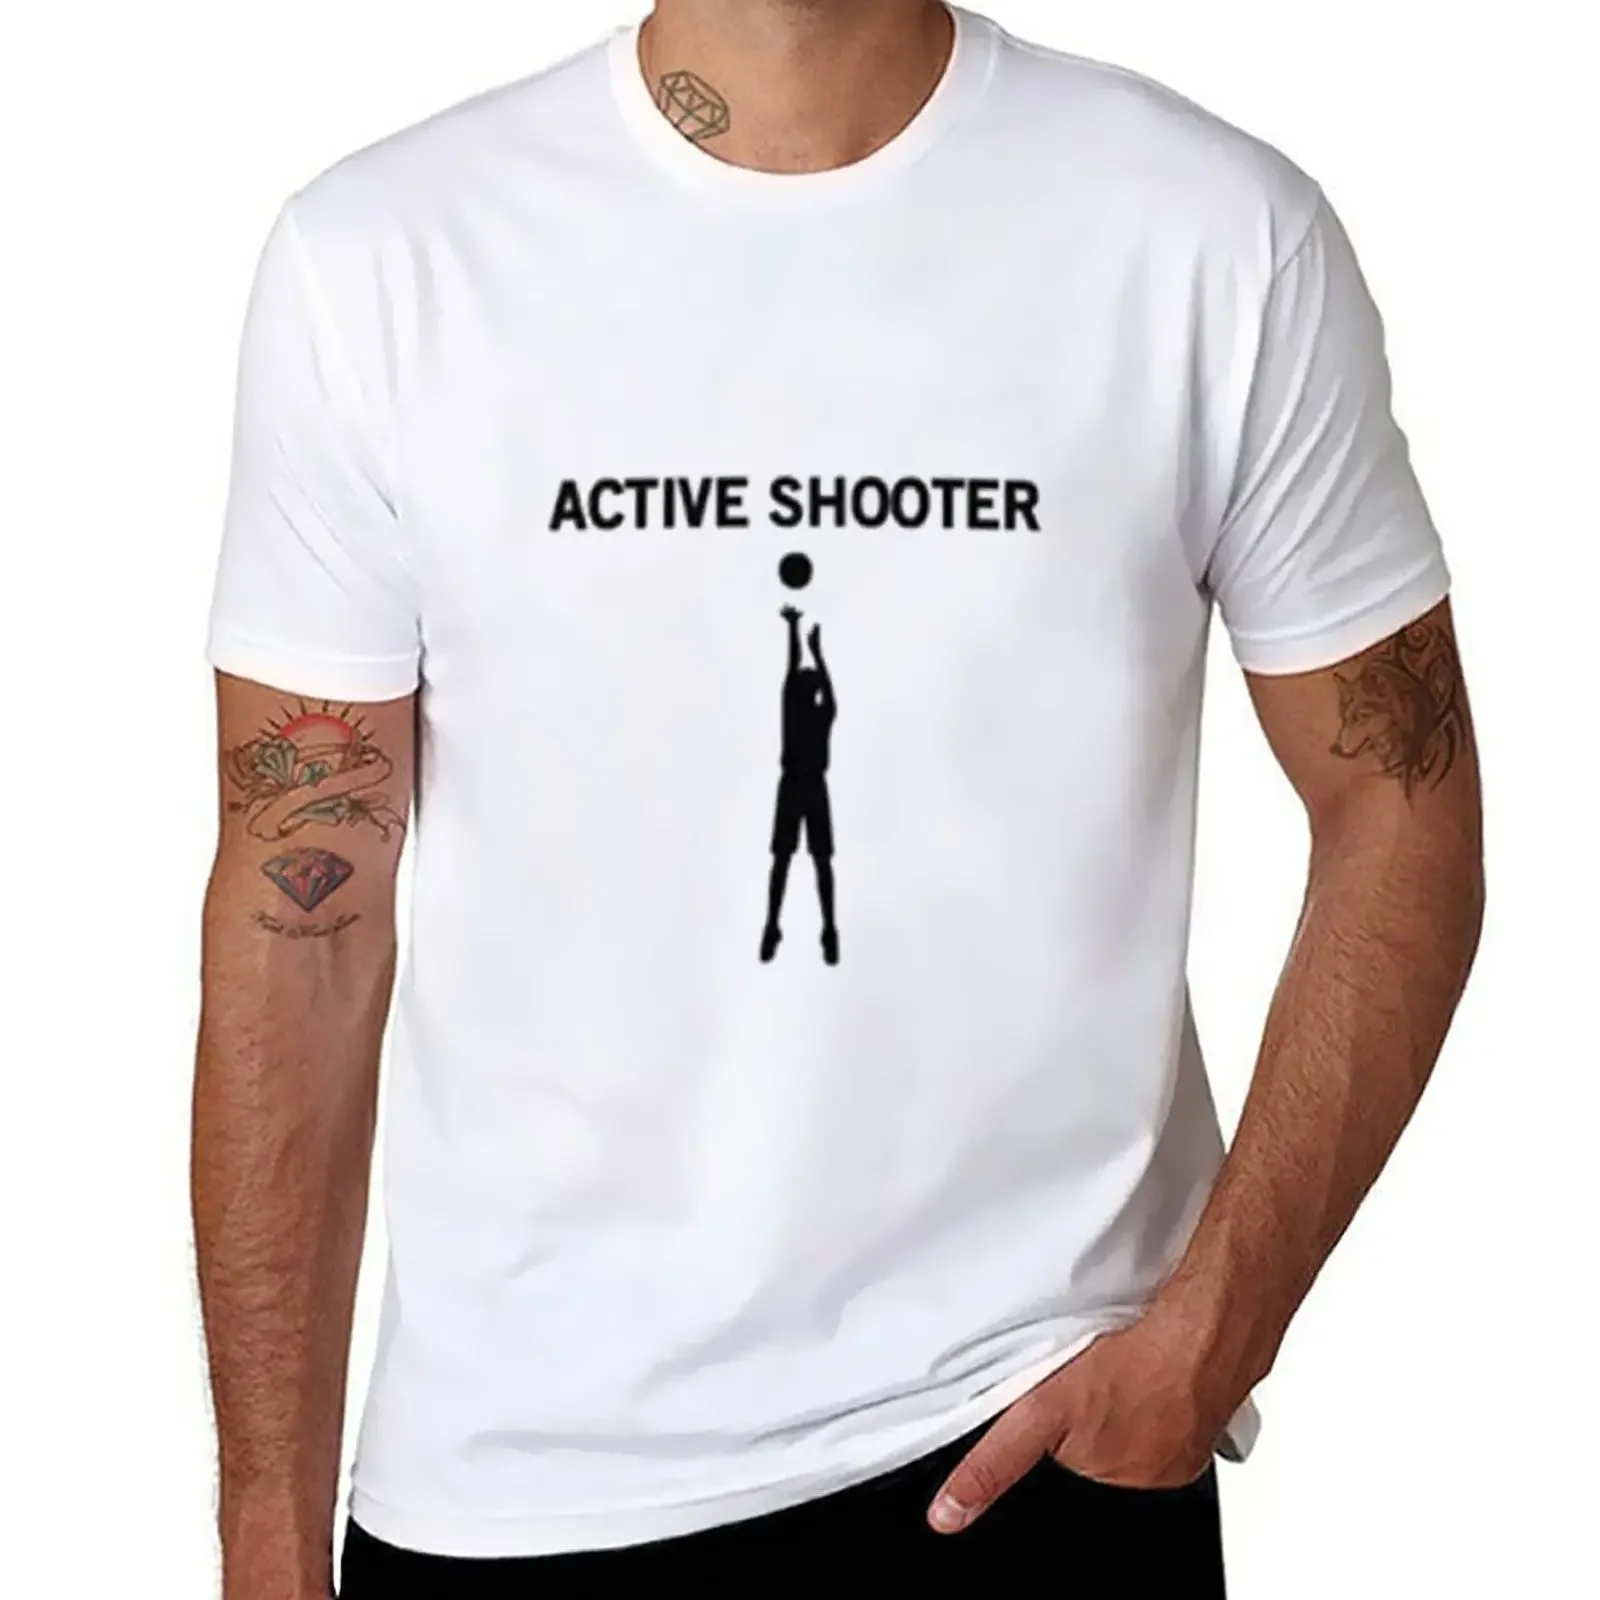 

Active Shooter T-Shirt Aesthetic clothing customizeds mens graphic t-shirts anime